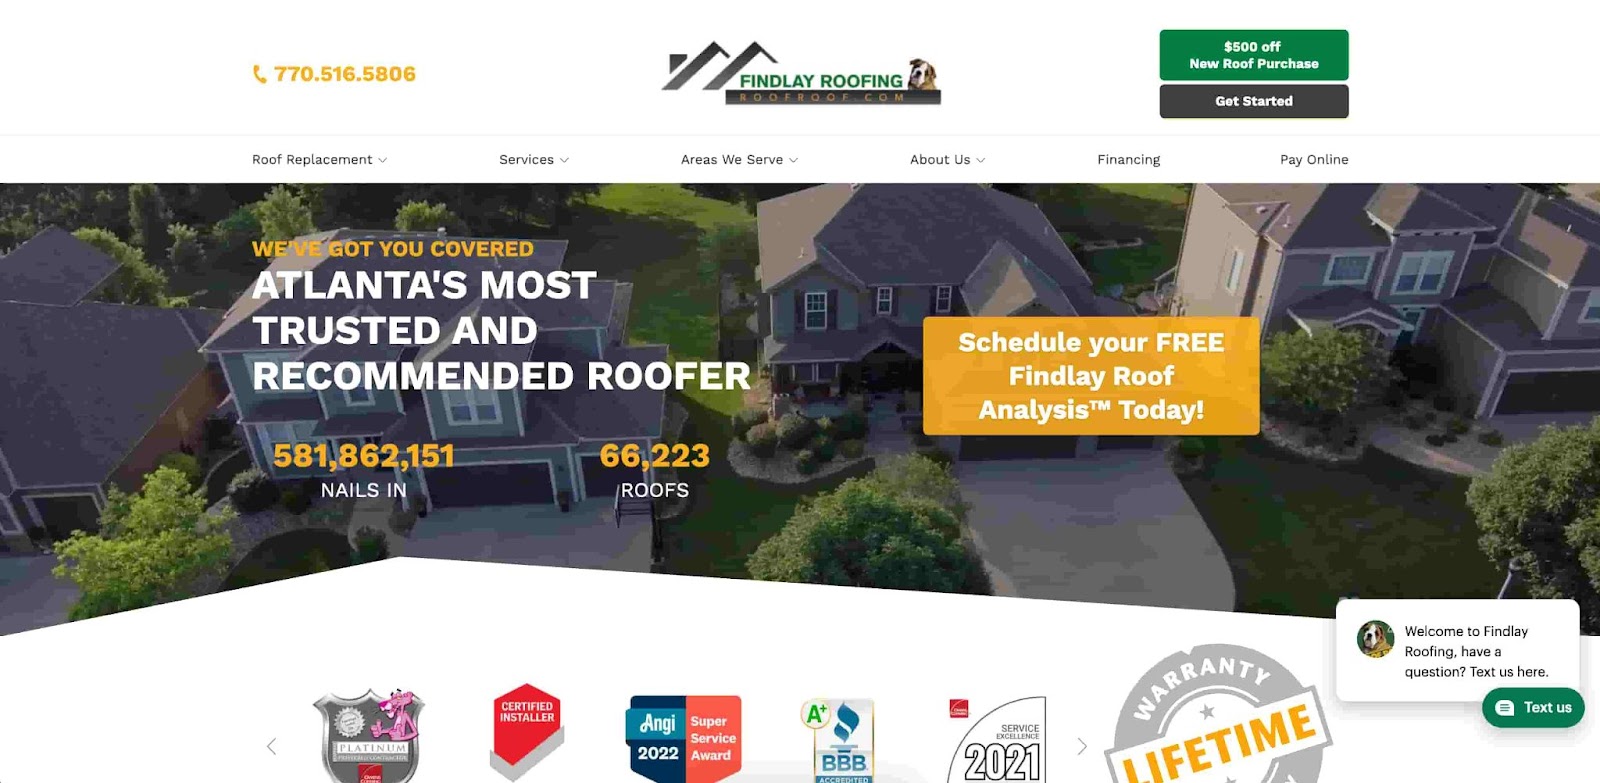 Findlay roofing’s website for atlanta roofing